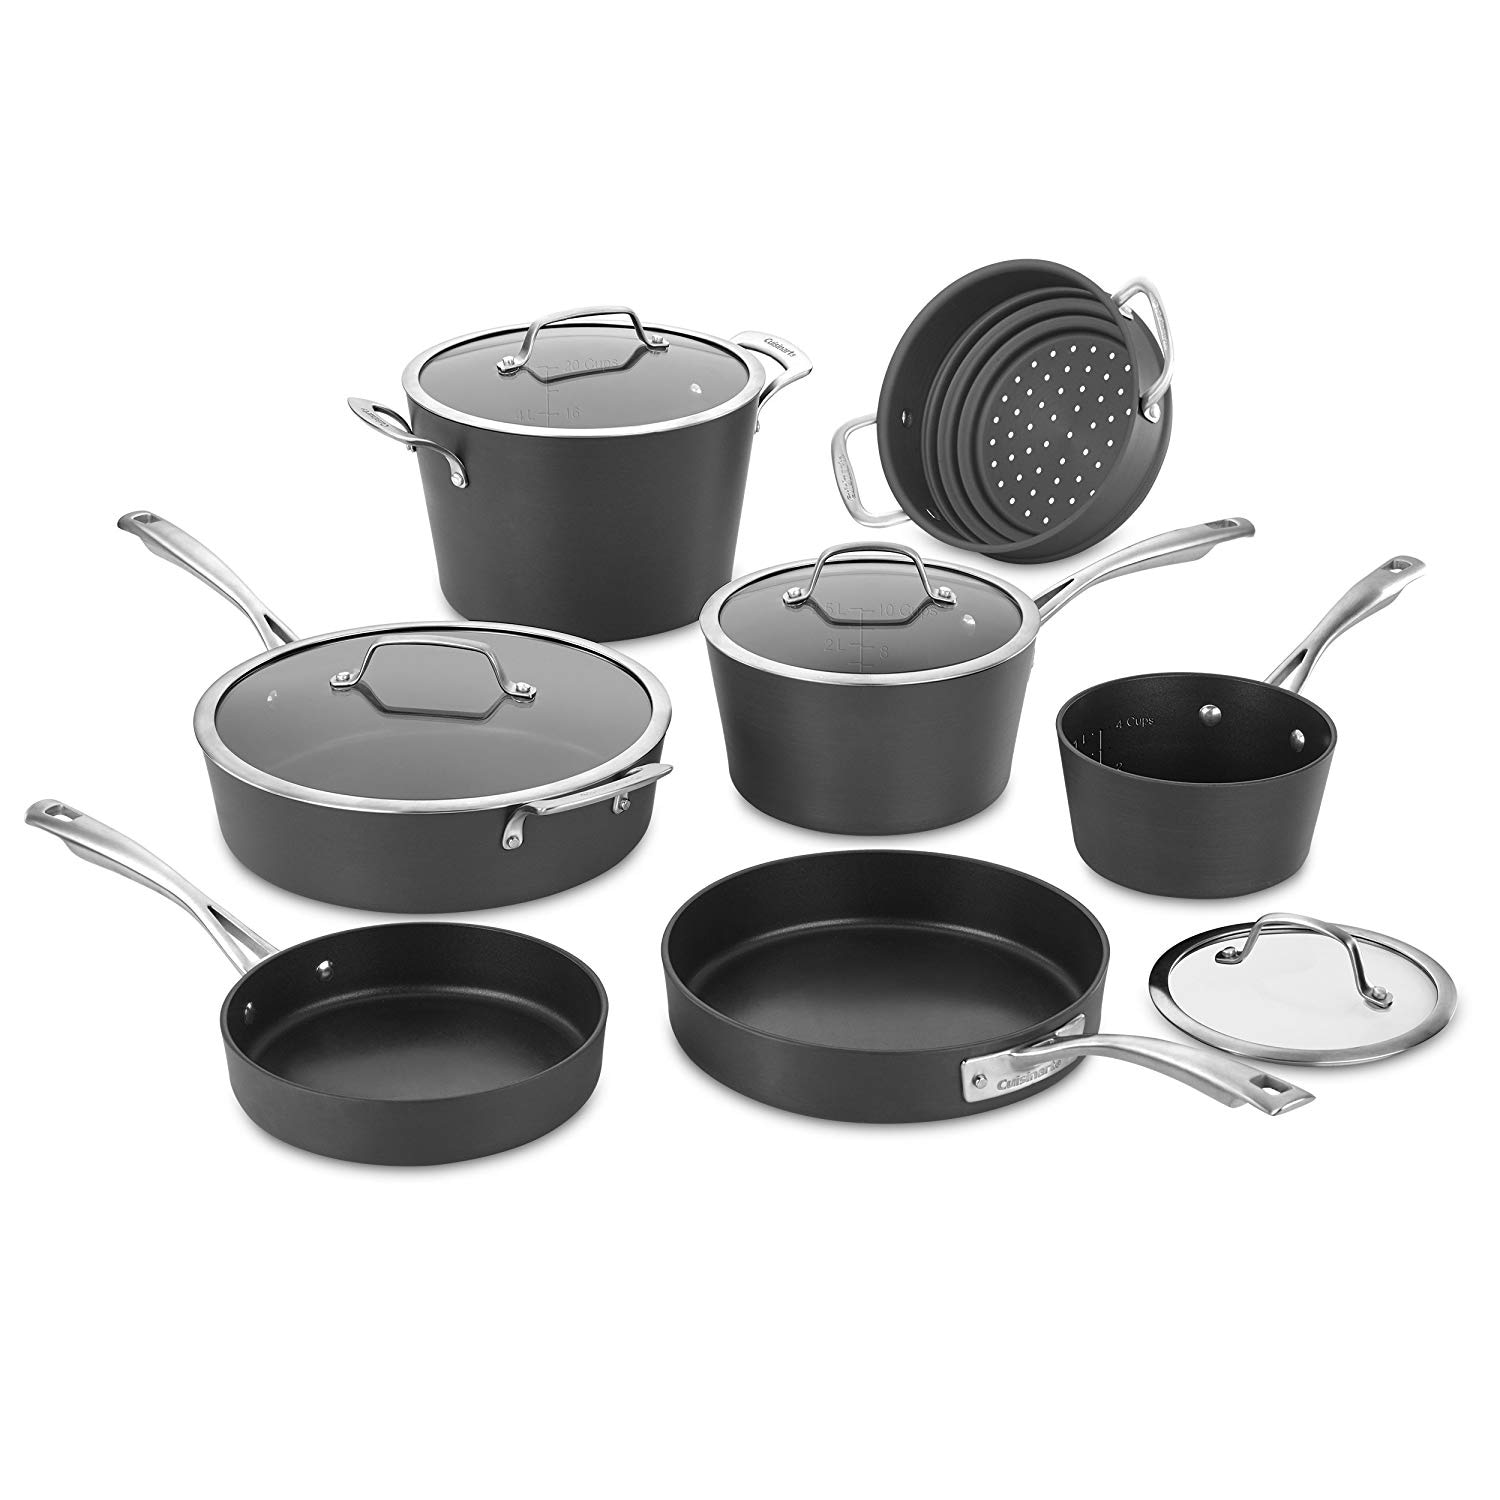 https://ak1.ostkcdn.com/images/products/is/images/direct/e7efdb8f3f983f0e17cb02d6682383a3009ae1c7/Cuisinart-62I-11-Chef%27s-Classis-11-Piece-Conical-Hard-Anodized-Non-Stick-Cookware-Set%2C-Black.jpg